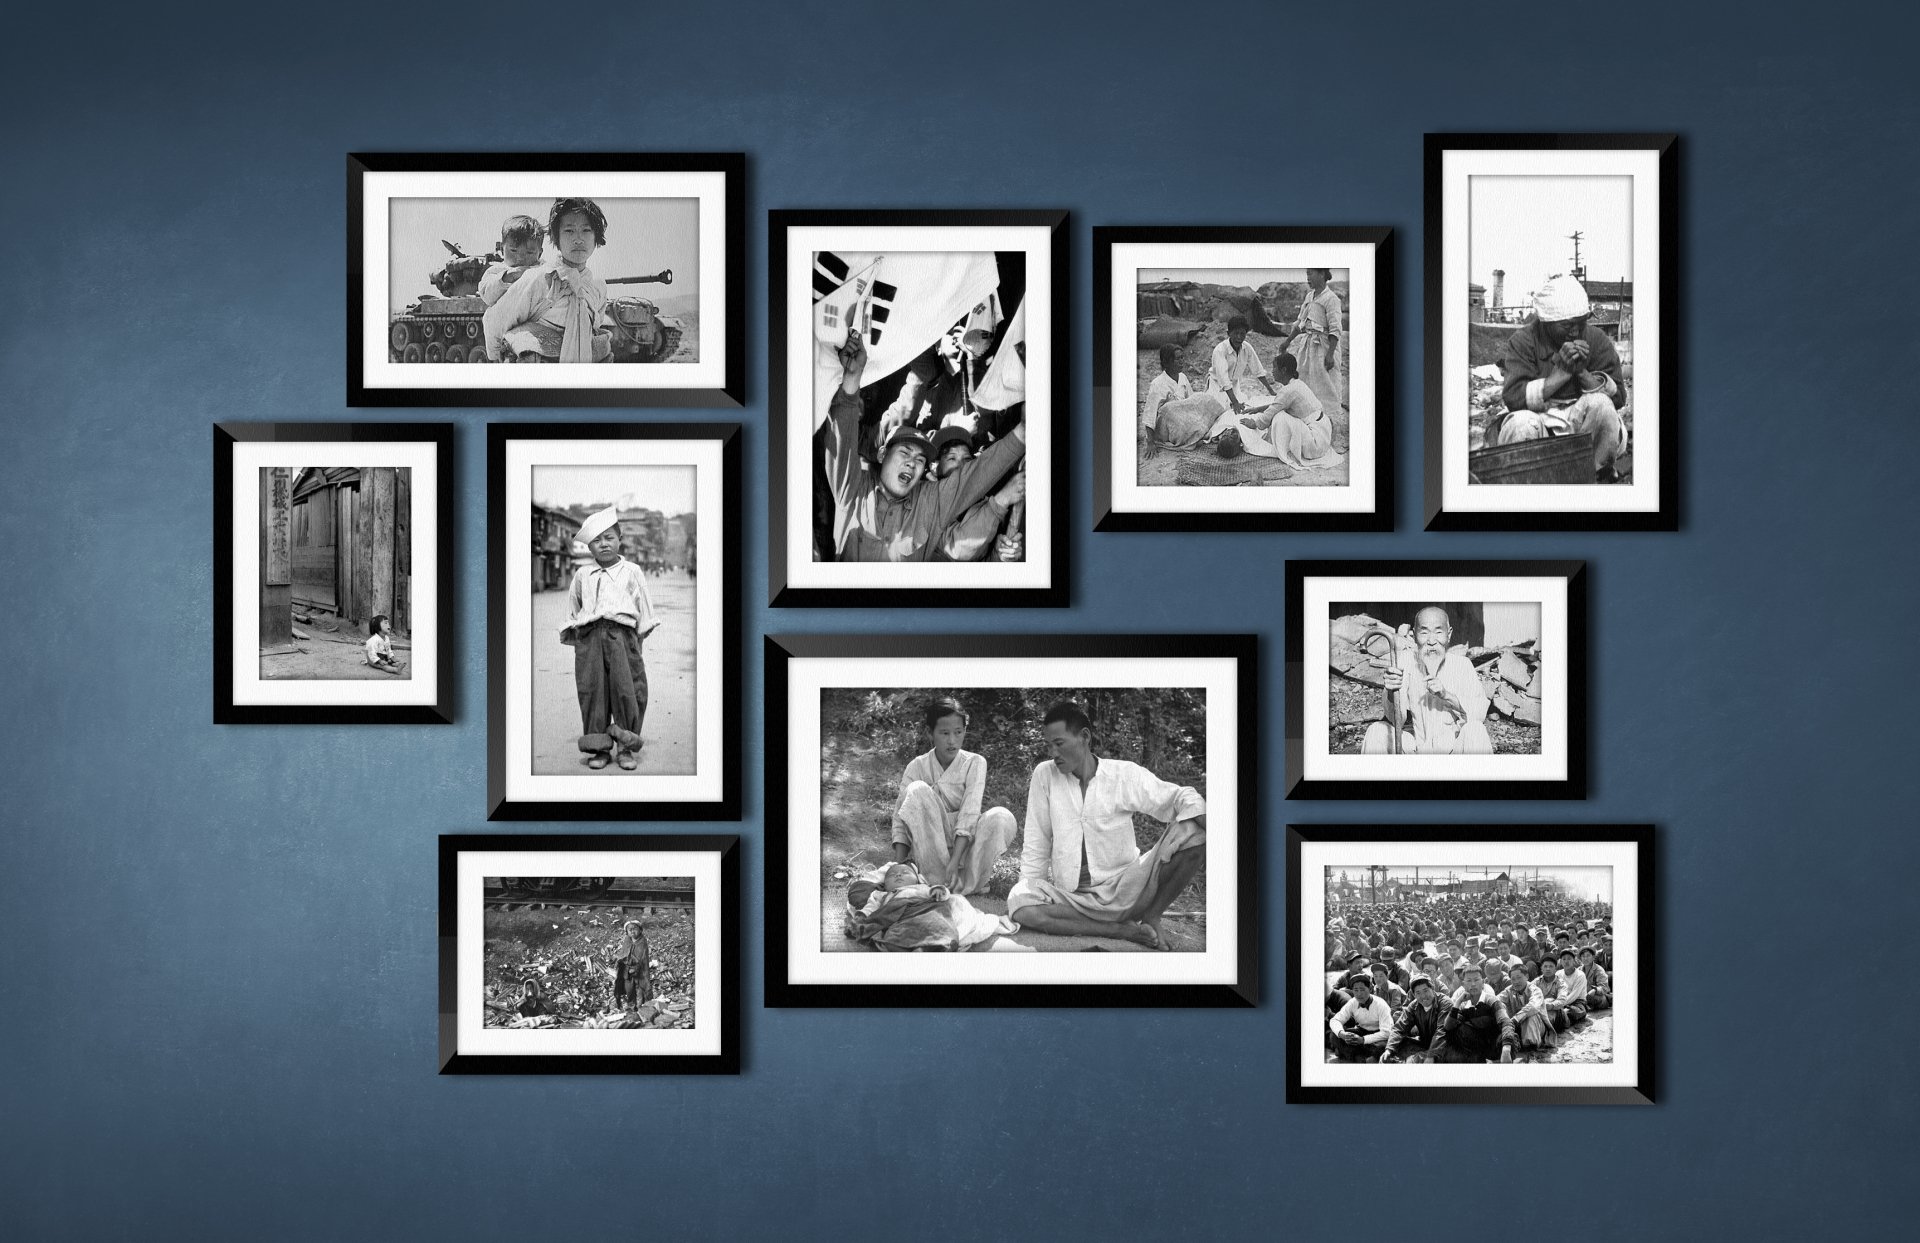 A collage of photo frames containing black and white photos with historical images from the Korean War.